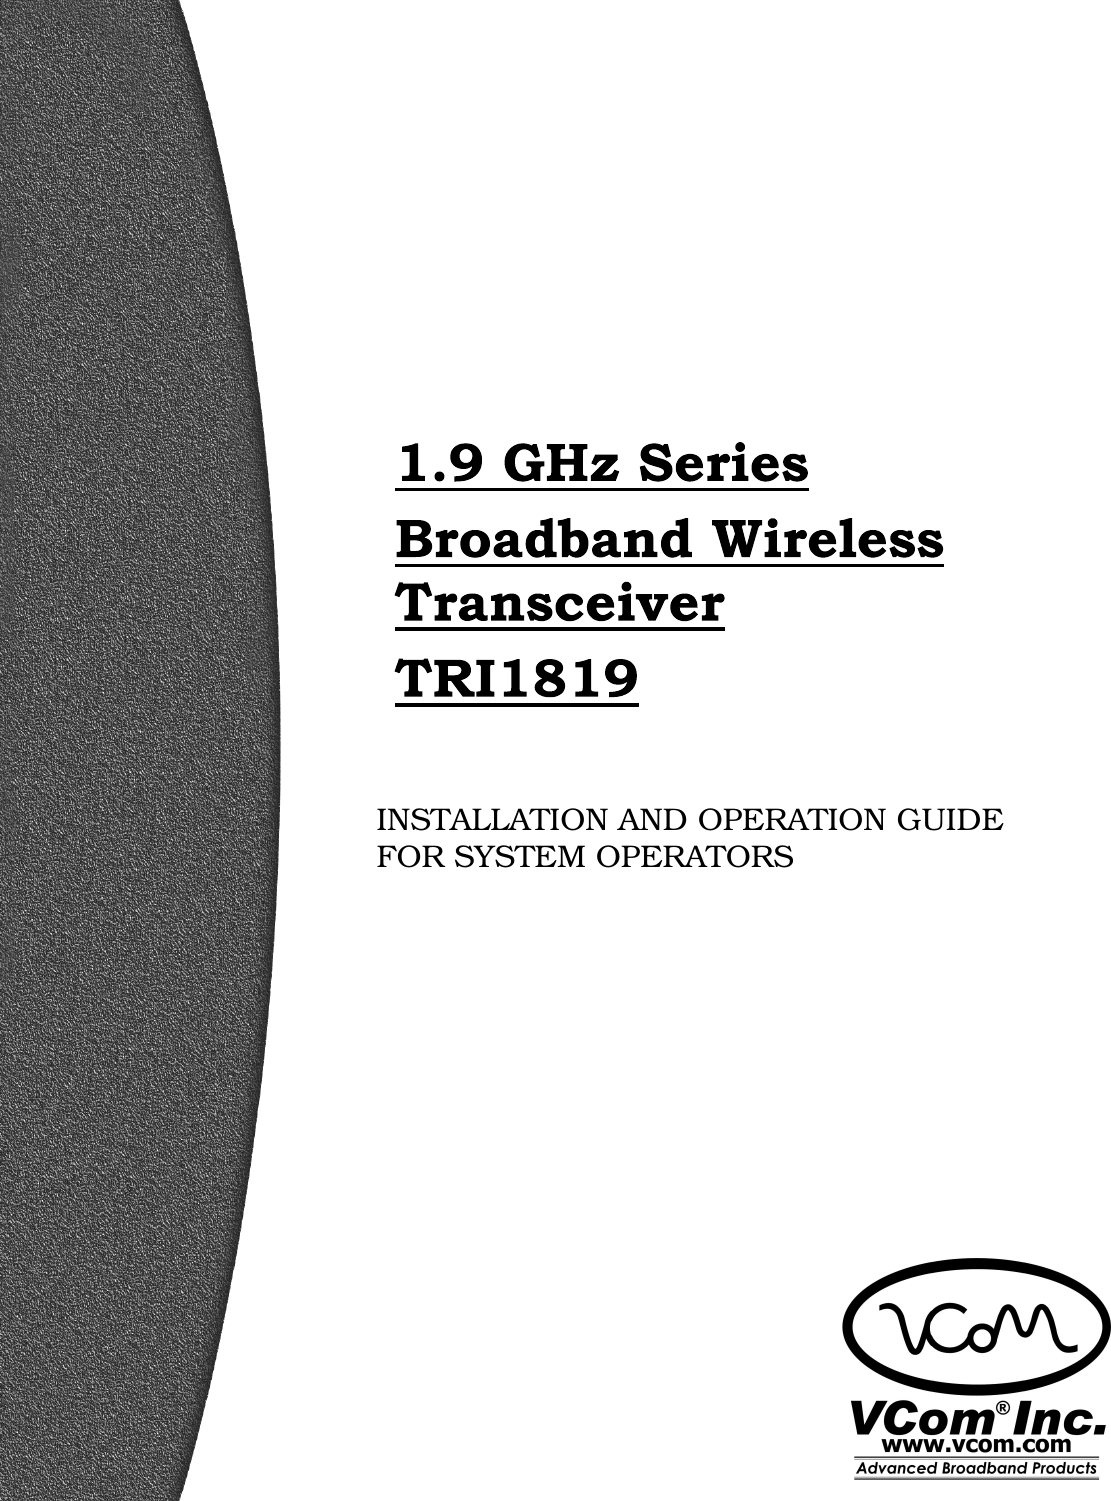      INSTALLATION AND OPERATION GUIDE FOR SYSTEM OPERATORS 